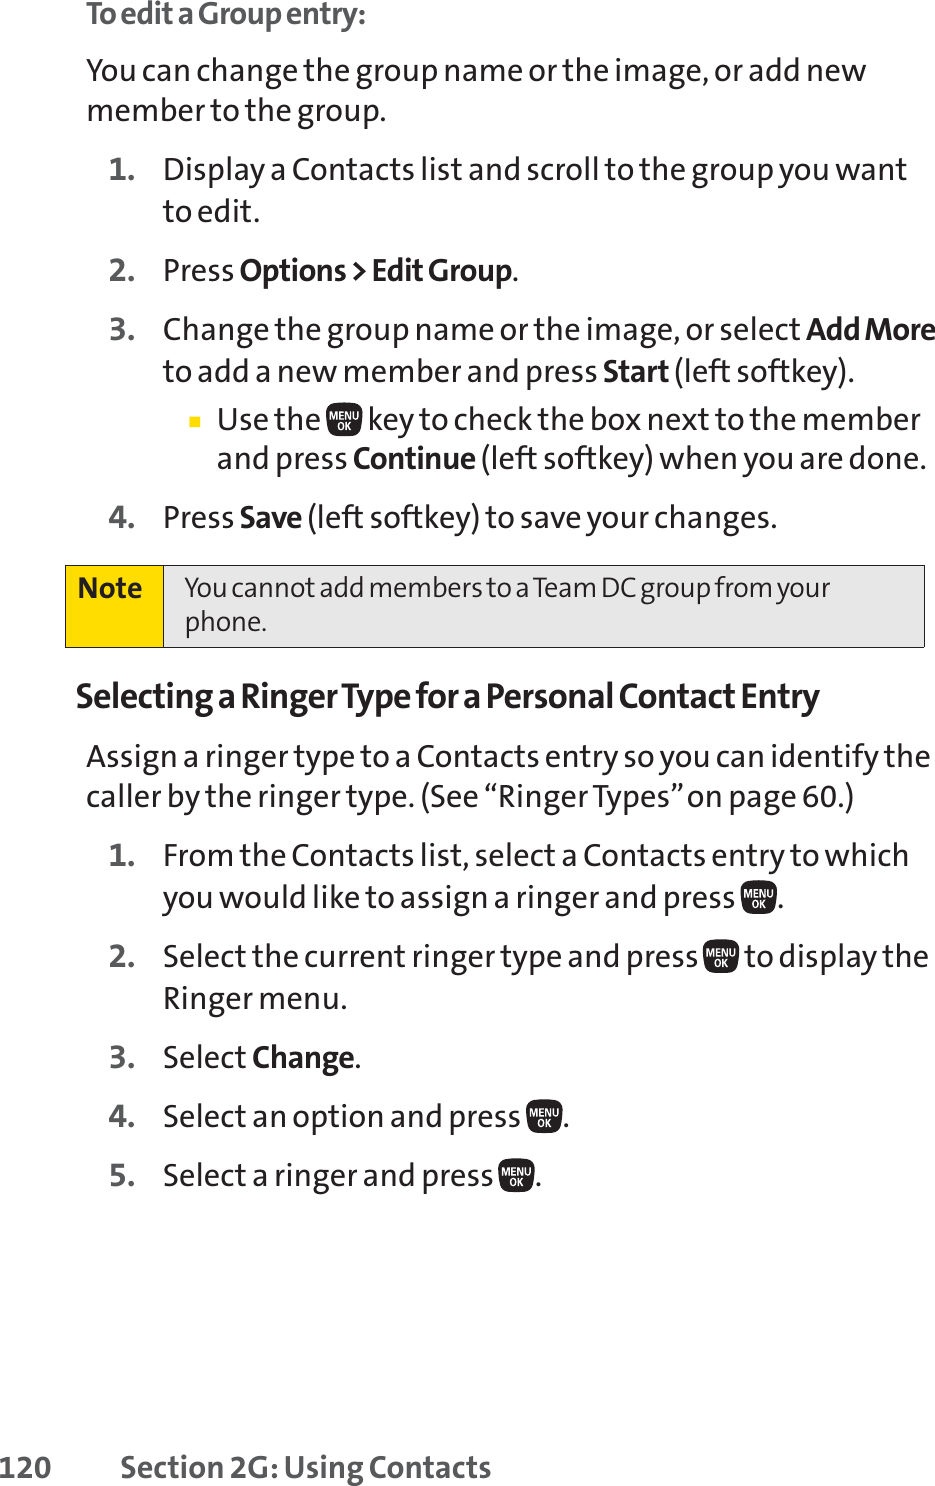 120 Section 2G: Using ContactsTo edit a Group entry:You can change the group name or the image, or add newmember to the group.1. Display a Contacts list and scroll to the group you wantto edit.2. Press Options &gt; Edit Group.3. Change the group name or the image, or select Add Moreto add a new member and press Start (left softkey).䡲Use the  key to check the box next to the memberand press Continue (left softkey) when you are done.4. Press Save (left softkey) to save your changes.Selecting a Ringer Type for a Personal Contact EntryAssign a ringer type to a Contacts entry so you can identify thecaller by the ringer type. (See “Ringer Types”on page 60.)1. From the Contacts list, select a Contacts entry to whichyou would like to assign a ringer and press  .2. Select the current ringer type and press  to display theRinger menu.3. Select Change.4. Select an option and press  .5. Select a ringer and press  .Note You cannot add members to a Team DC group from yourphone.